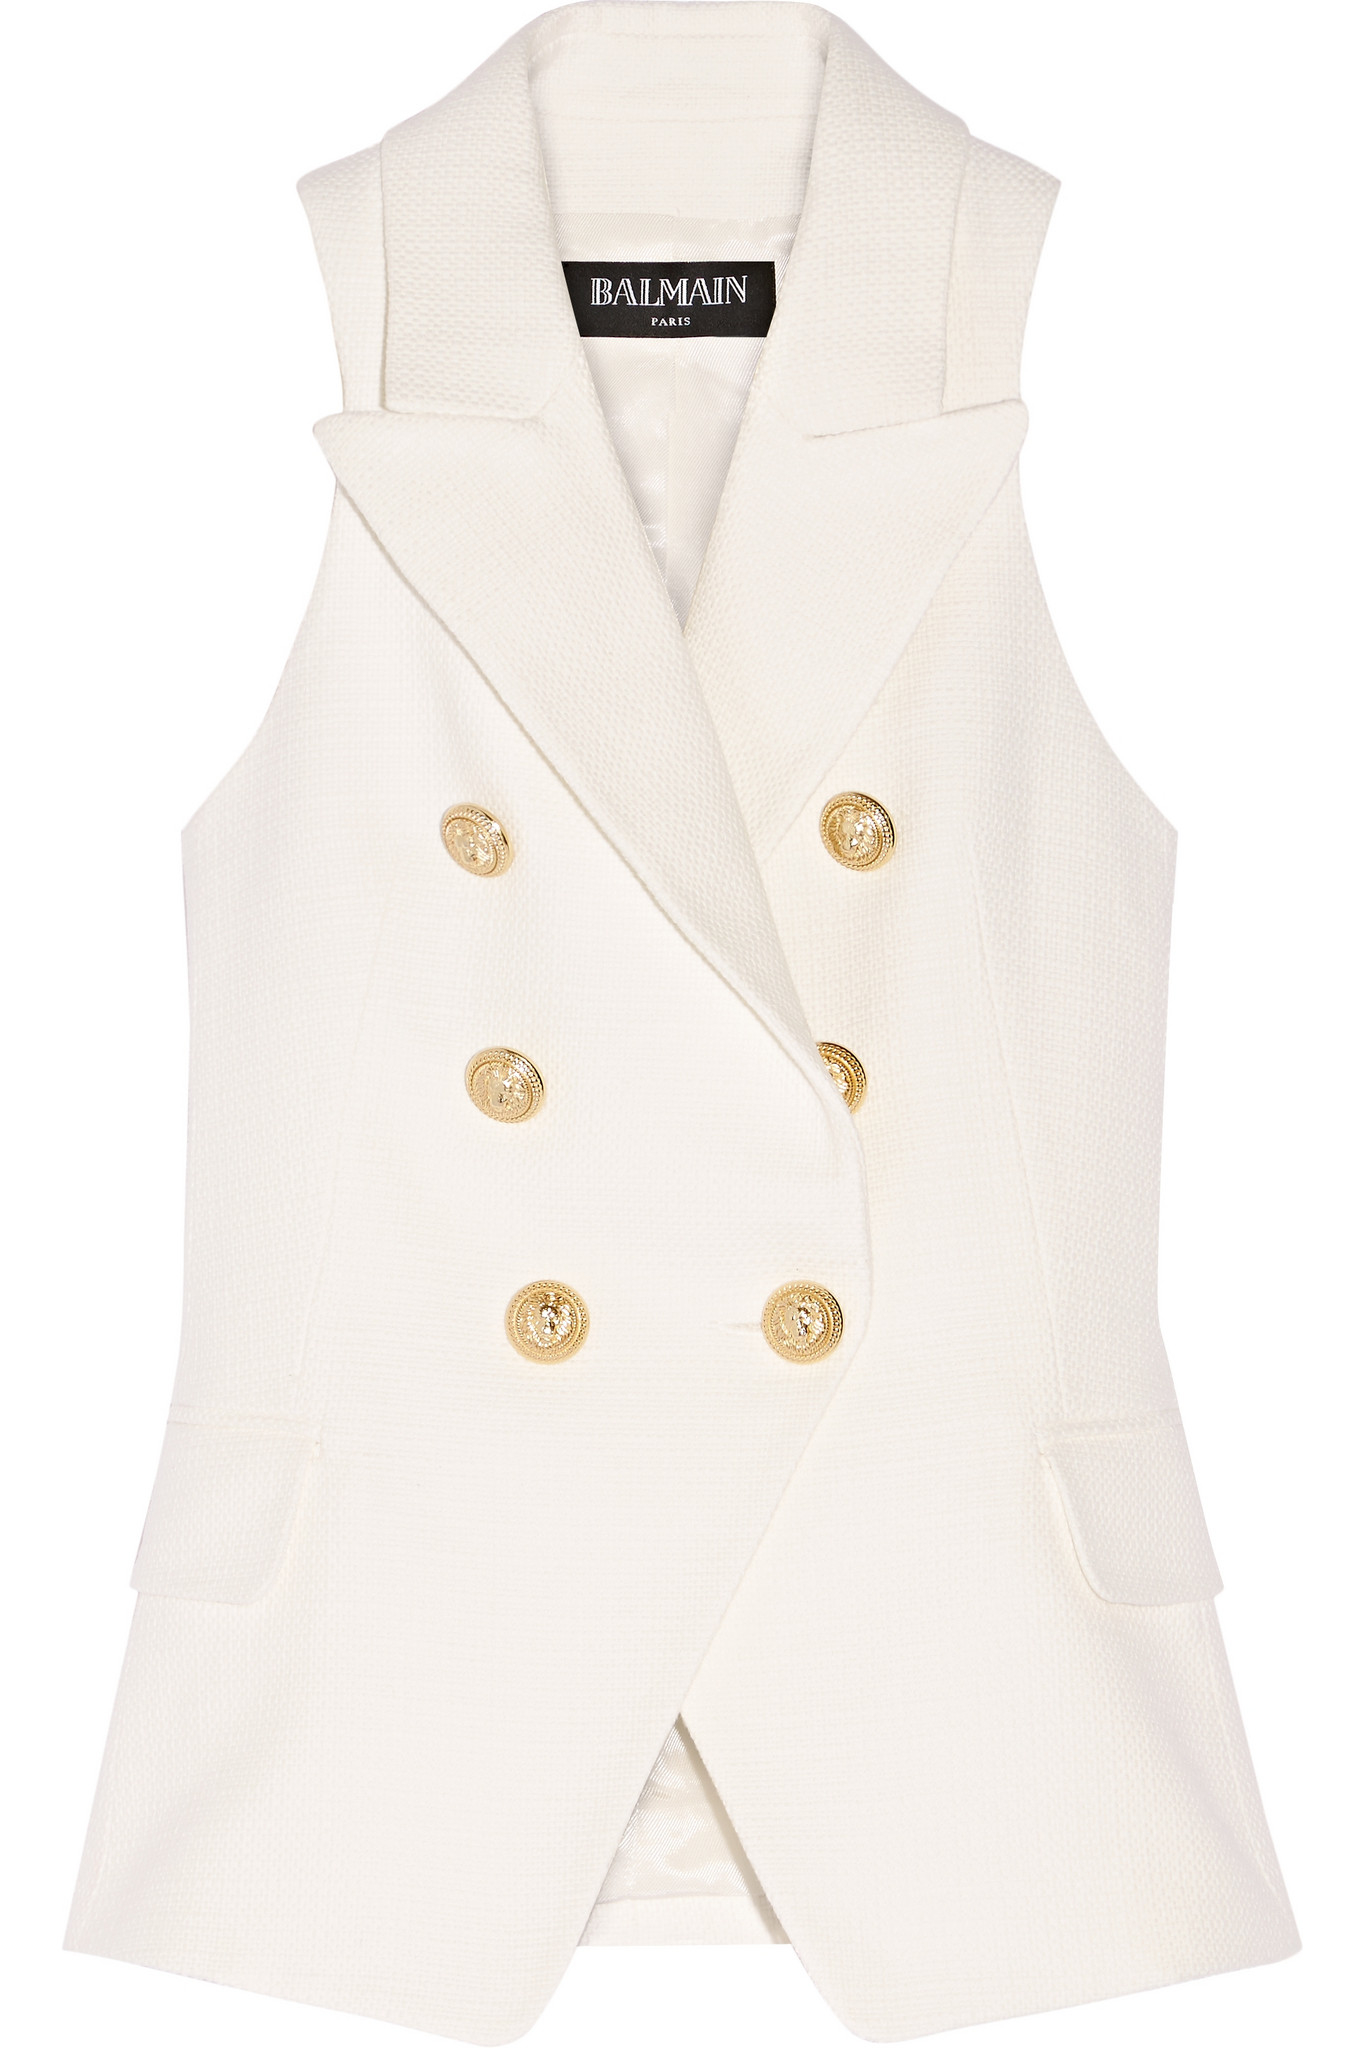 Balmain Double-breasted Basketweave Cotton Vest in White | Lyst Canada